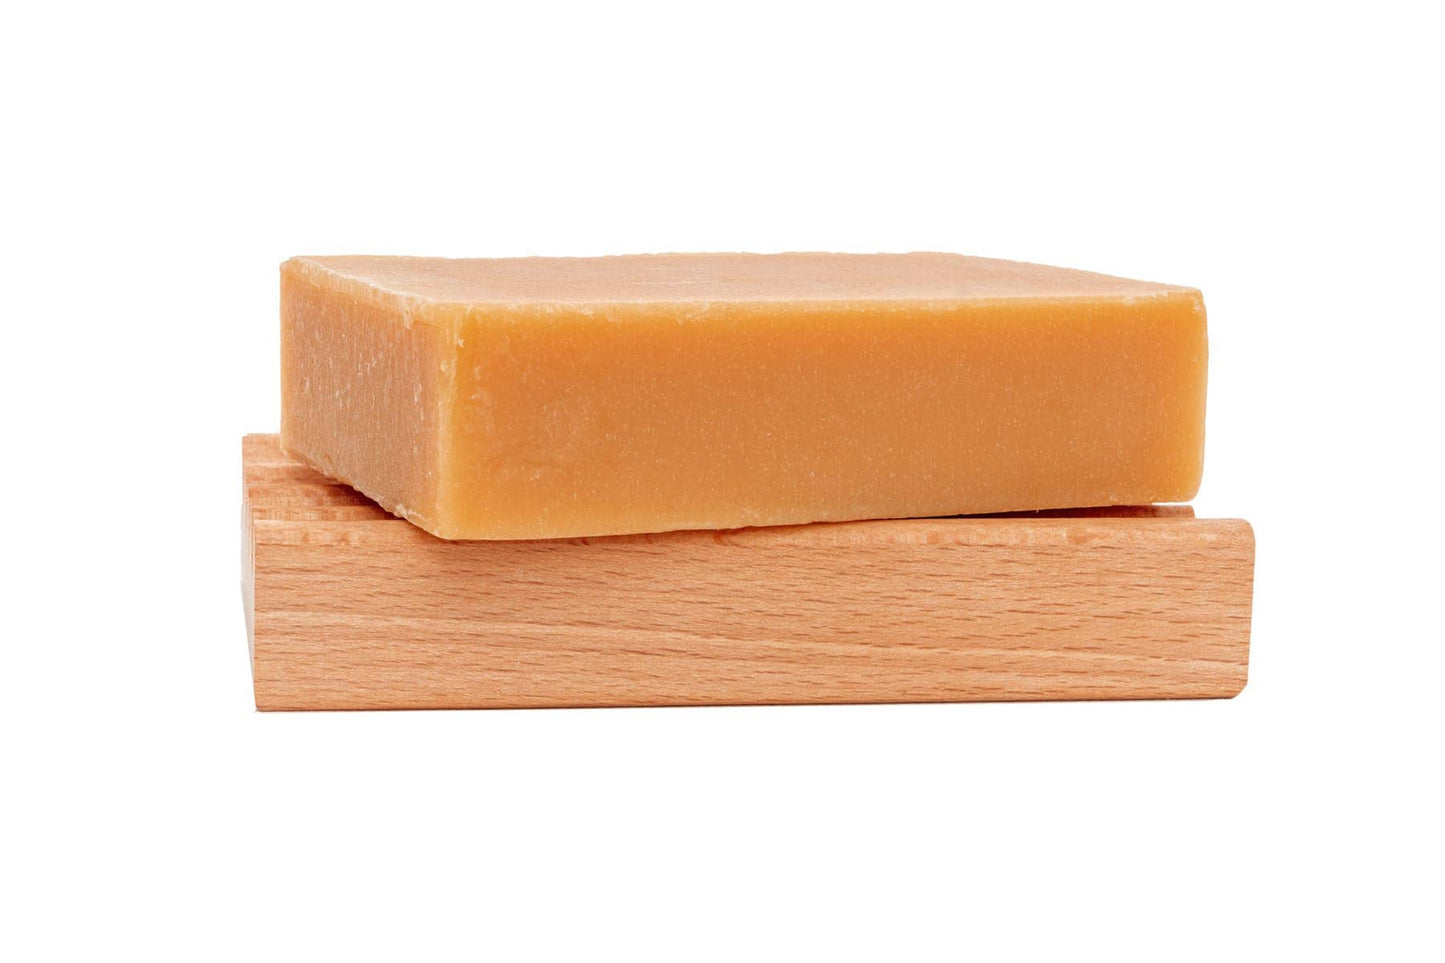 Unscented Goat Milk Soap Bar on an All Natural Wooden Soap Dish